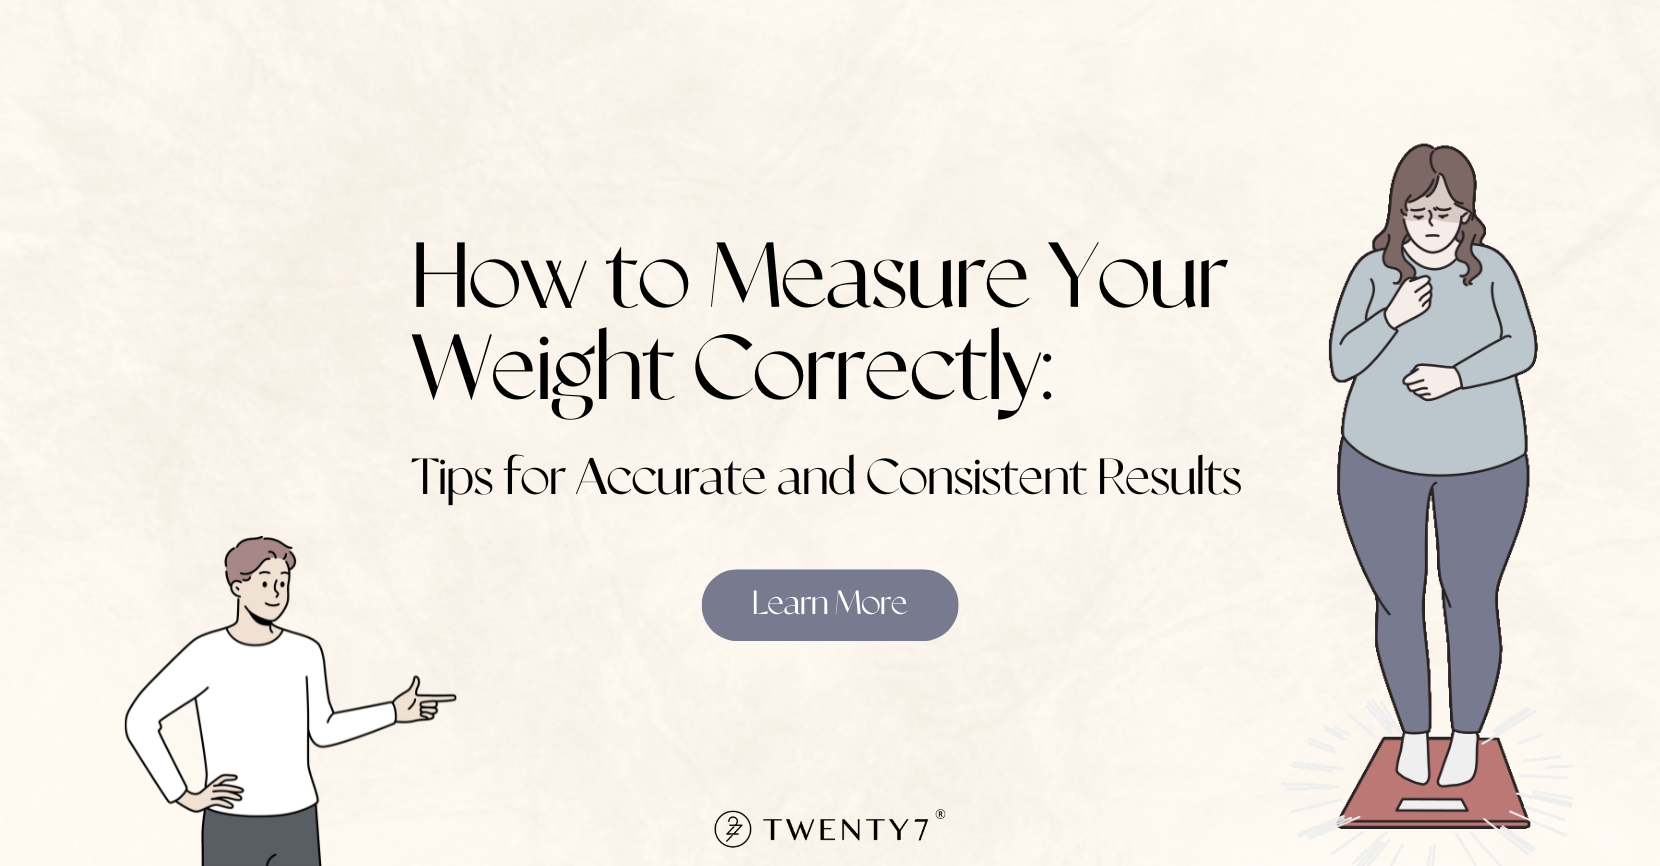 How to Measure Your Weight Correctly: Tips for Accurate and Consistent Results